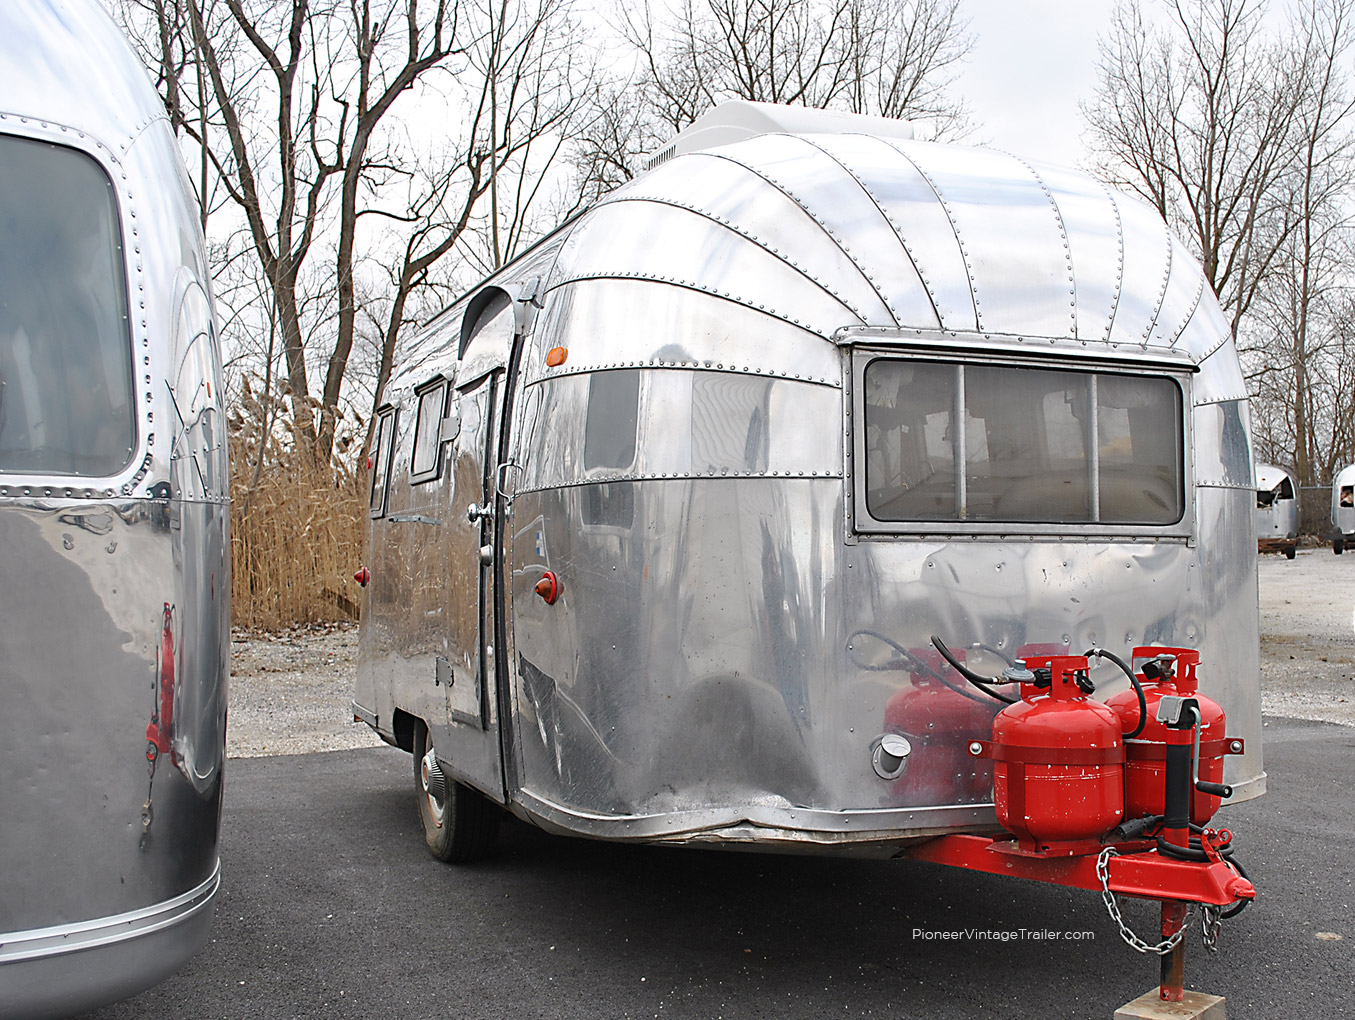 1954 Airstream Wanderer - front view before panel replacement